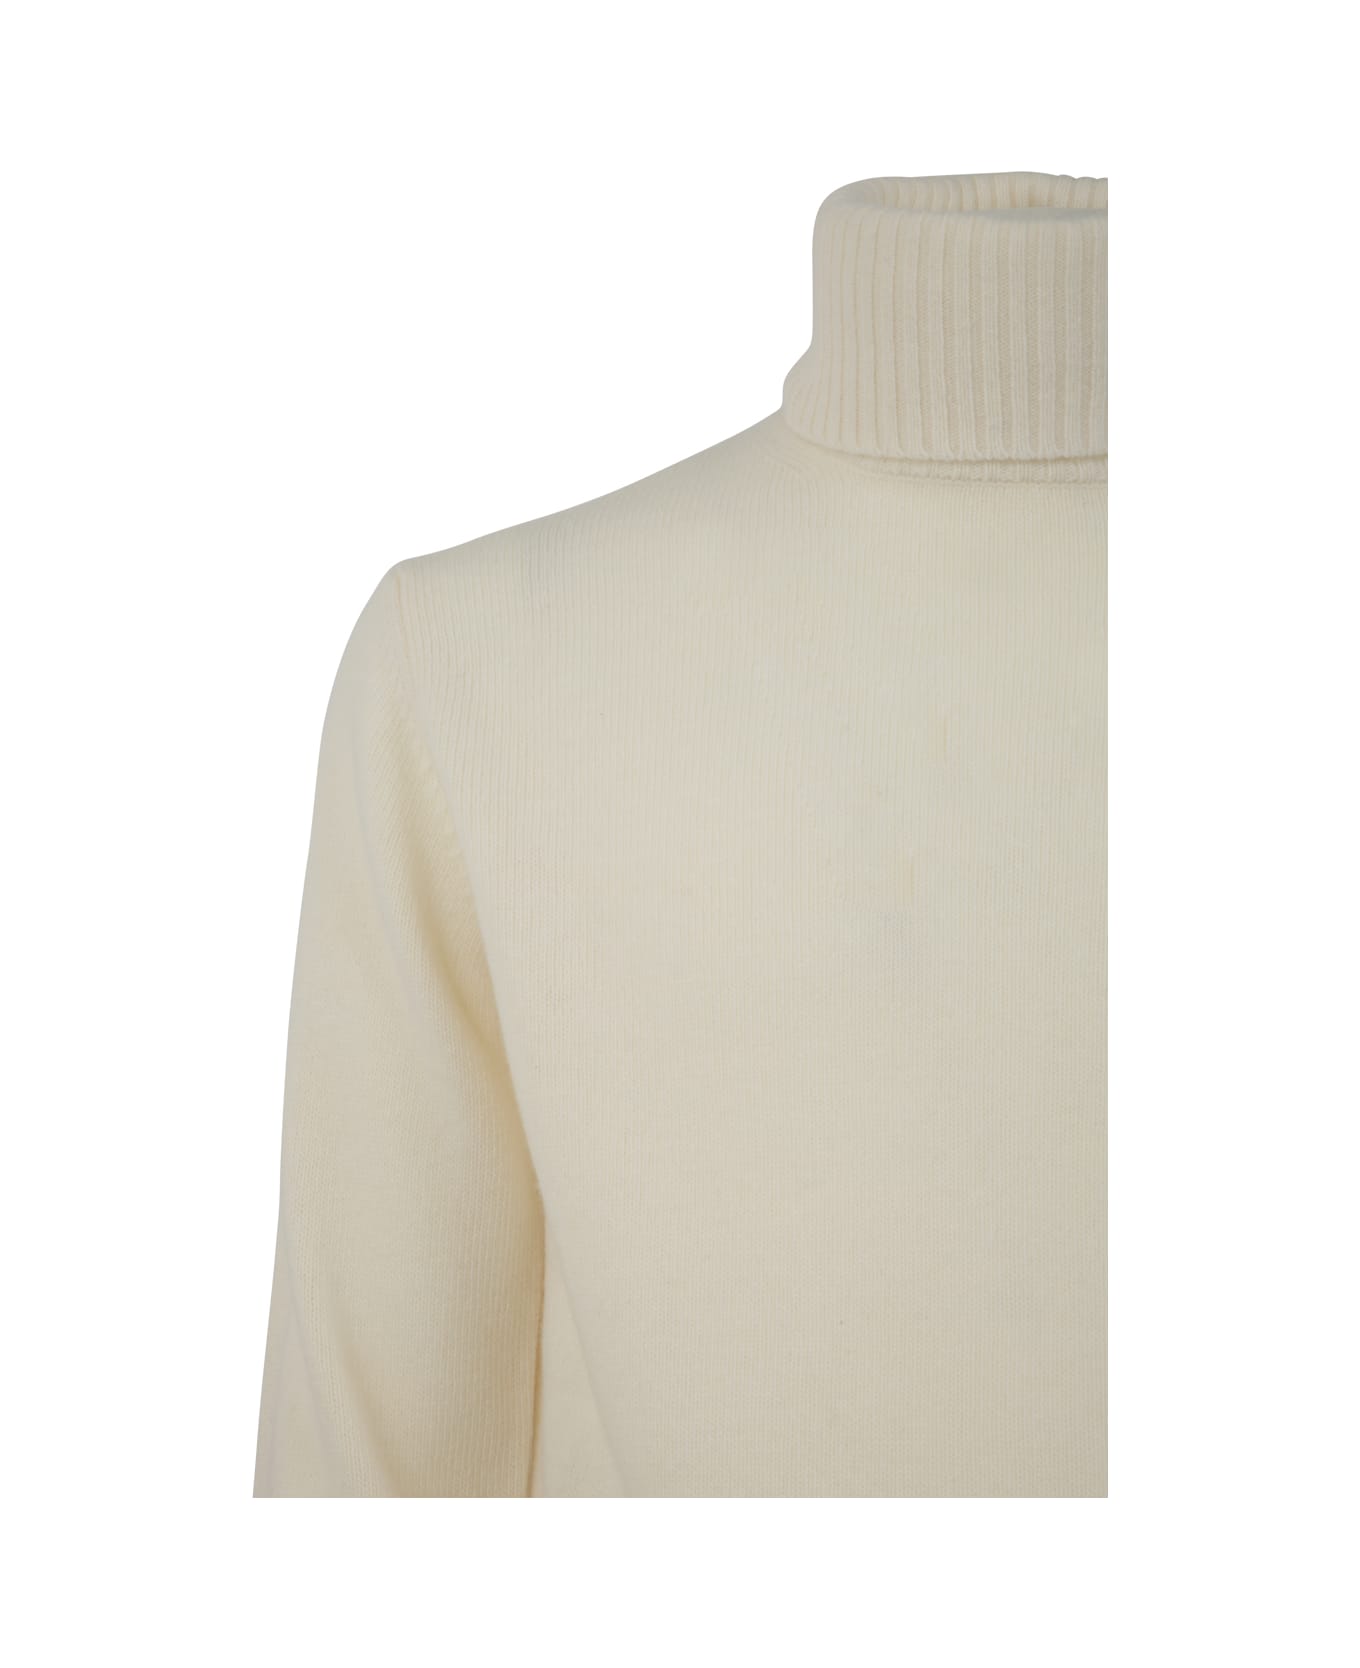 Nuur Long Sleeves Turtle Neck Sweater - White